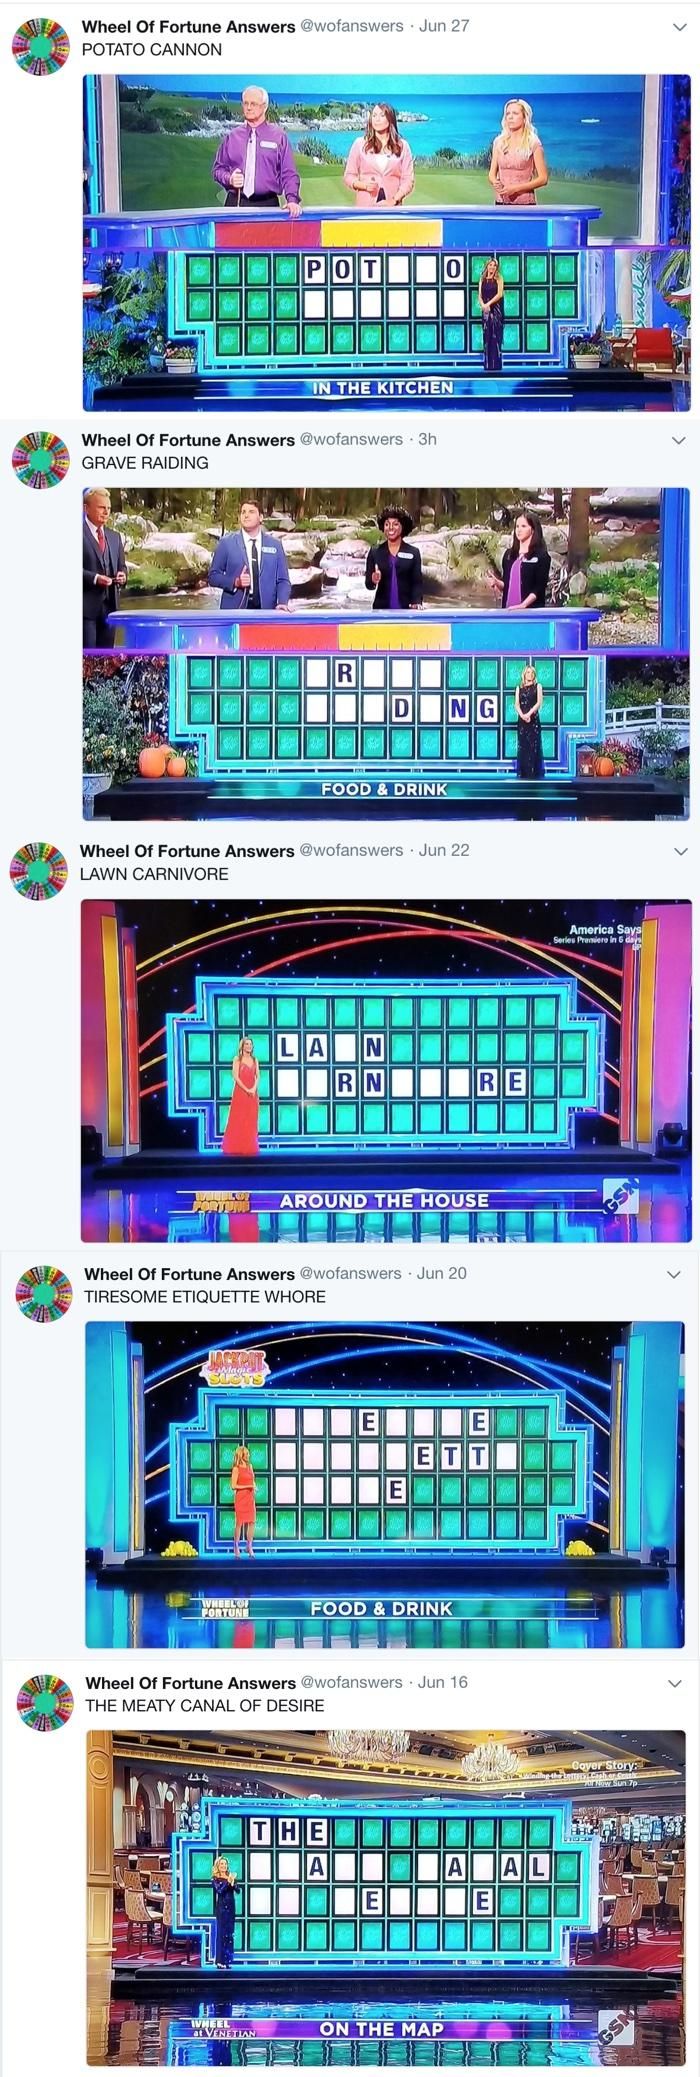 Just discovered the "Wheel of Fortune Answers" twitter feed